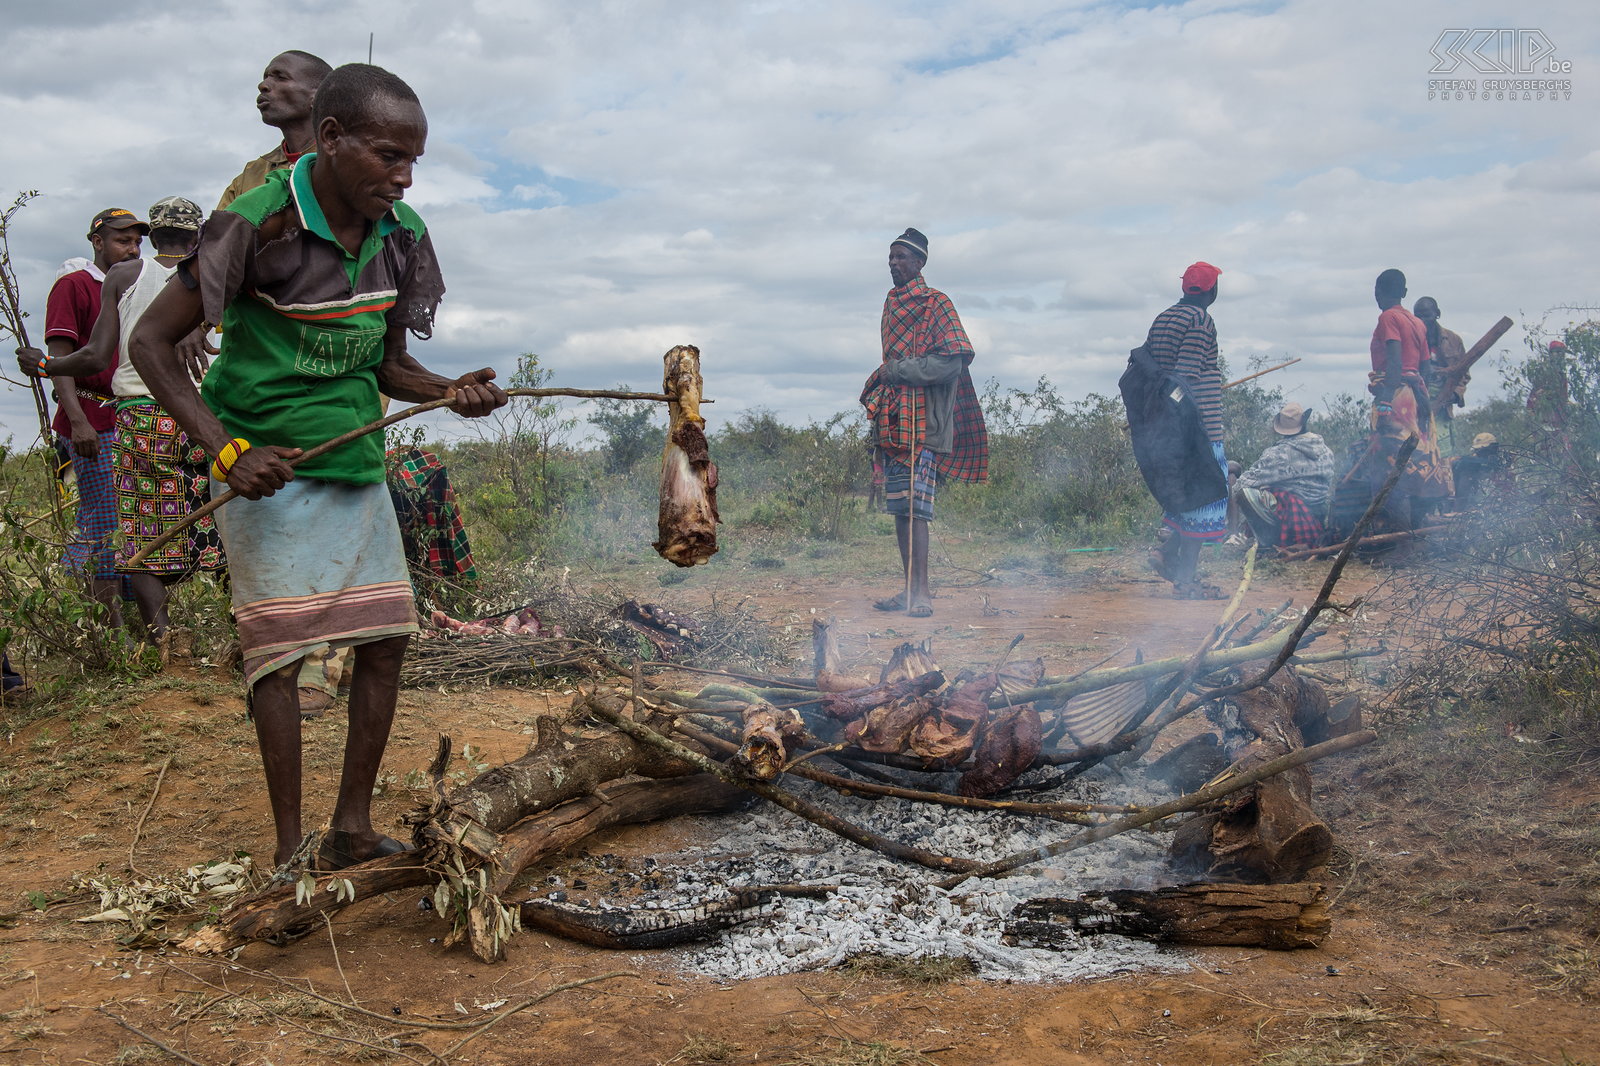 Kisima - Samburu lmuget - Roasting the meat We had a fantastic day with the friendly Samburu people. I'm sure that in the evening the people had an big feast. The next generation of young boys of this clan now has to wait at least 6 years for a new lmuget ceremony. Stefan Cruysberghs